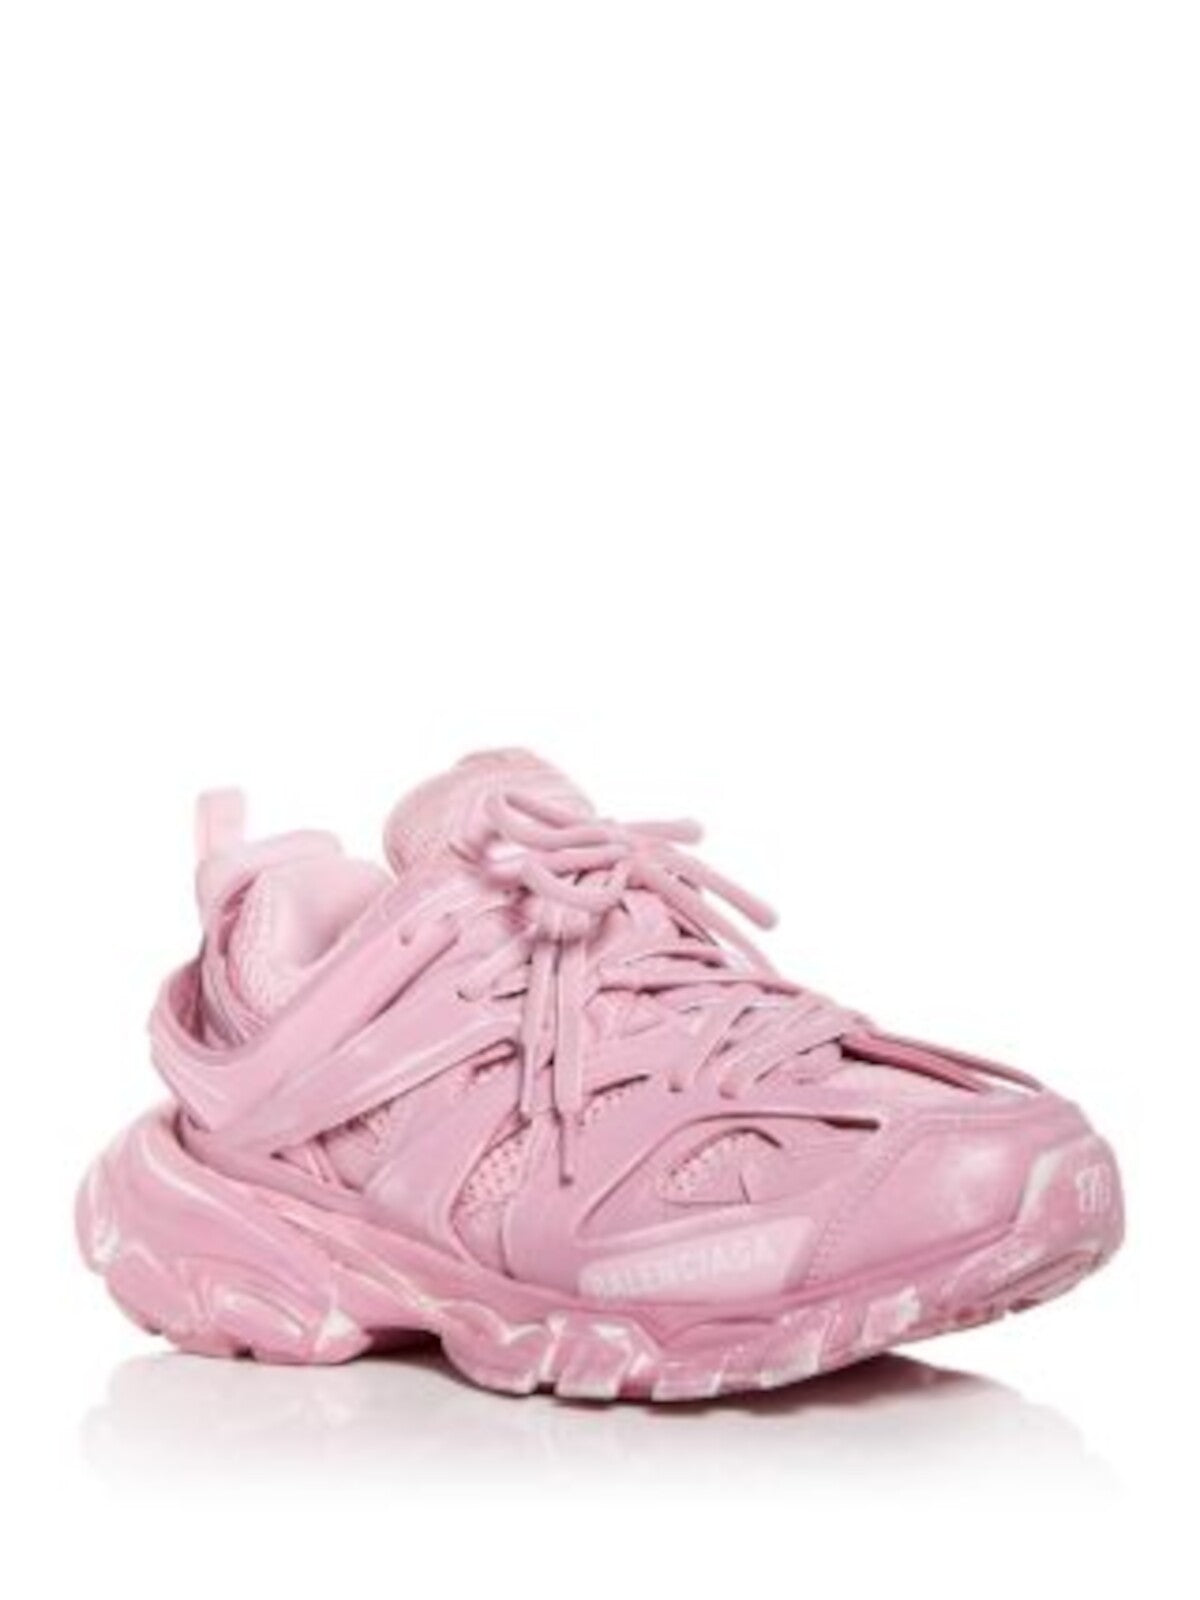 BALENCIAGA Womens Pink Distressed Breathable Track Round Toe Lace-Up Athletic Sneakers Shoes 7